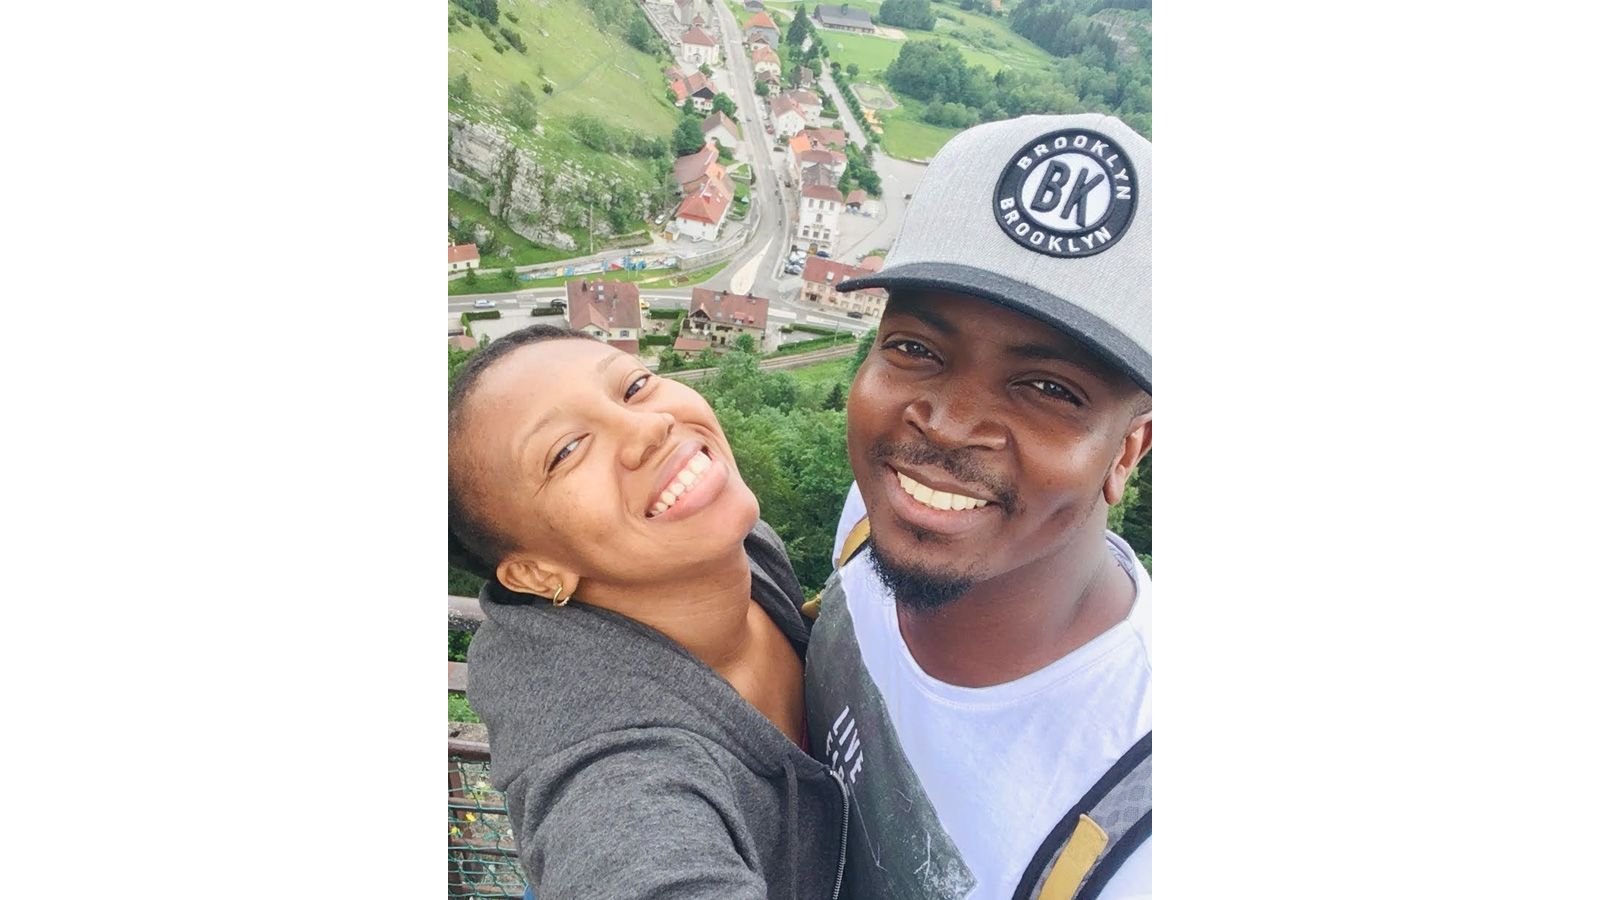 <strong>Quality time: </strong>On each of their meet-ups, the couple made the most of their time together. Here they are at Fort de Joux, a French château.